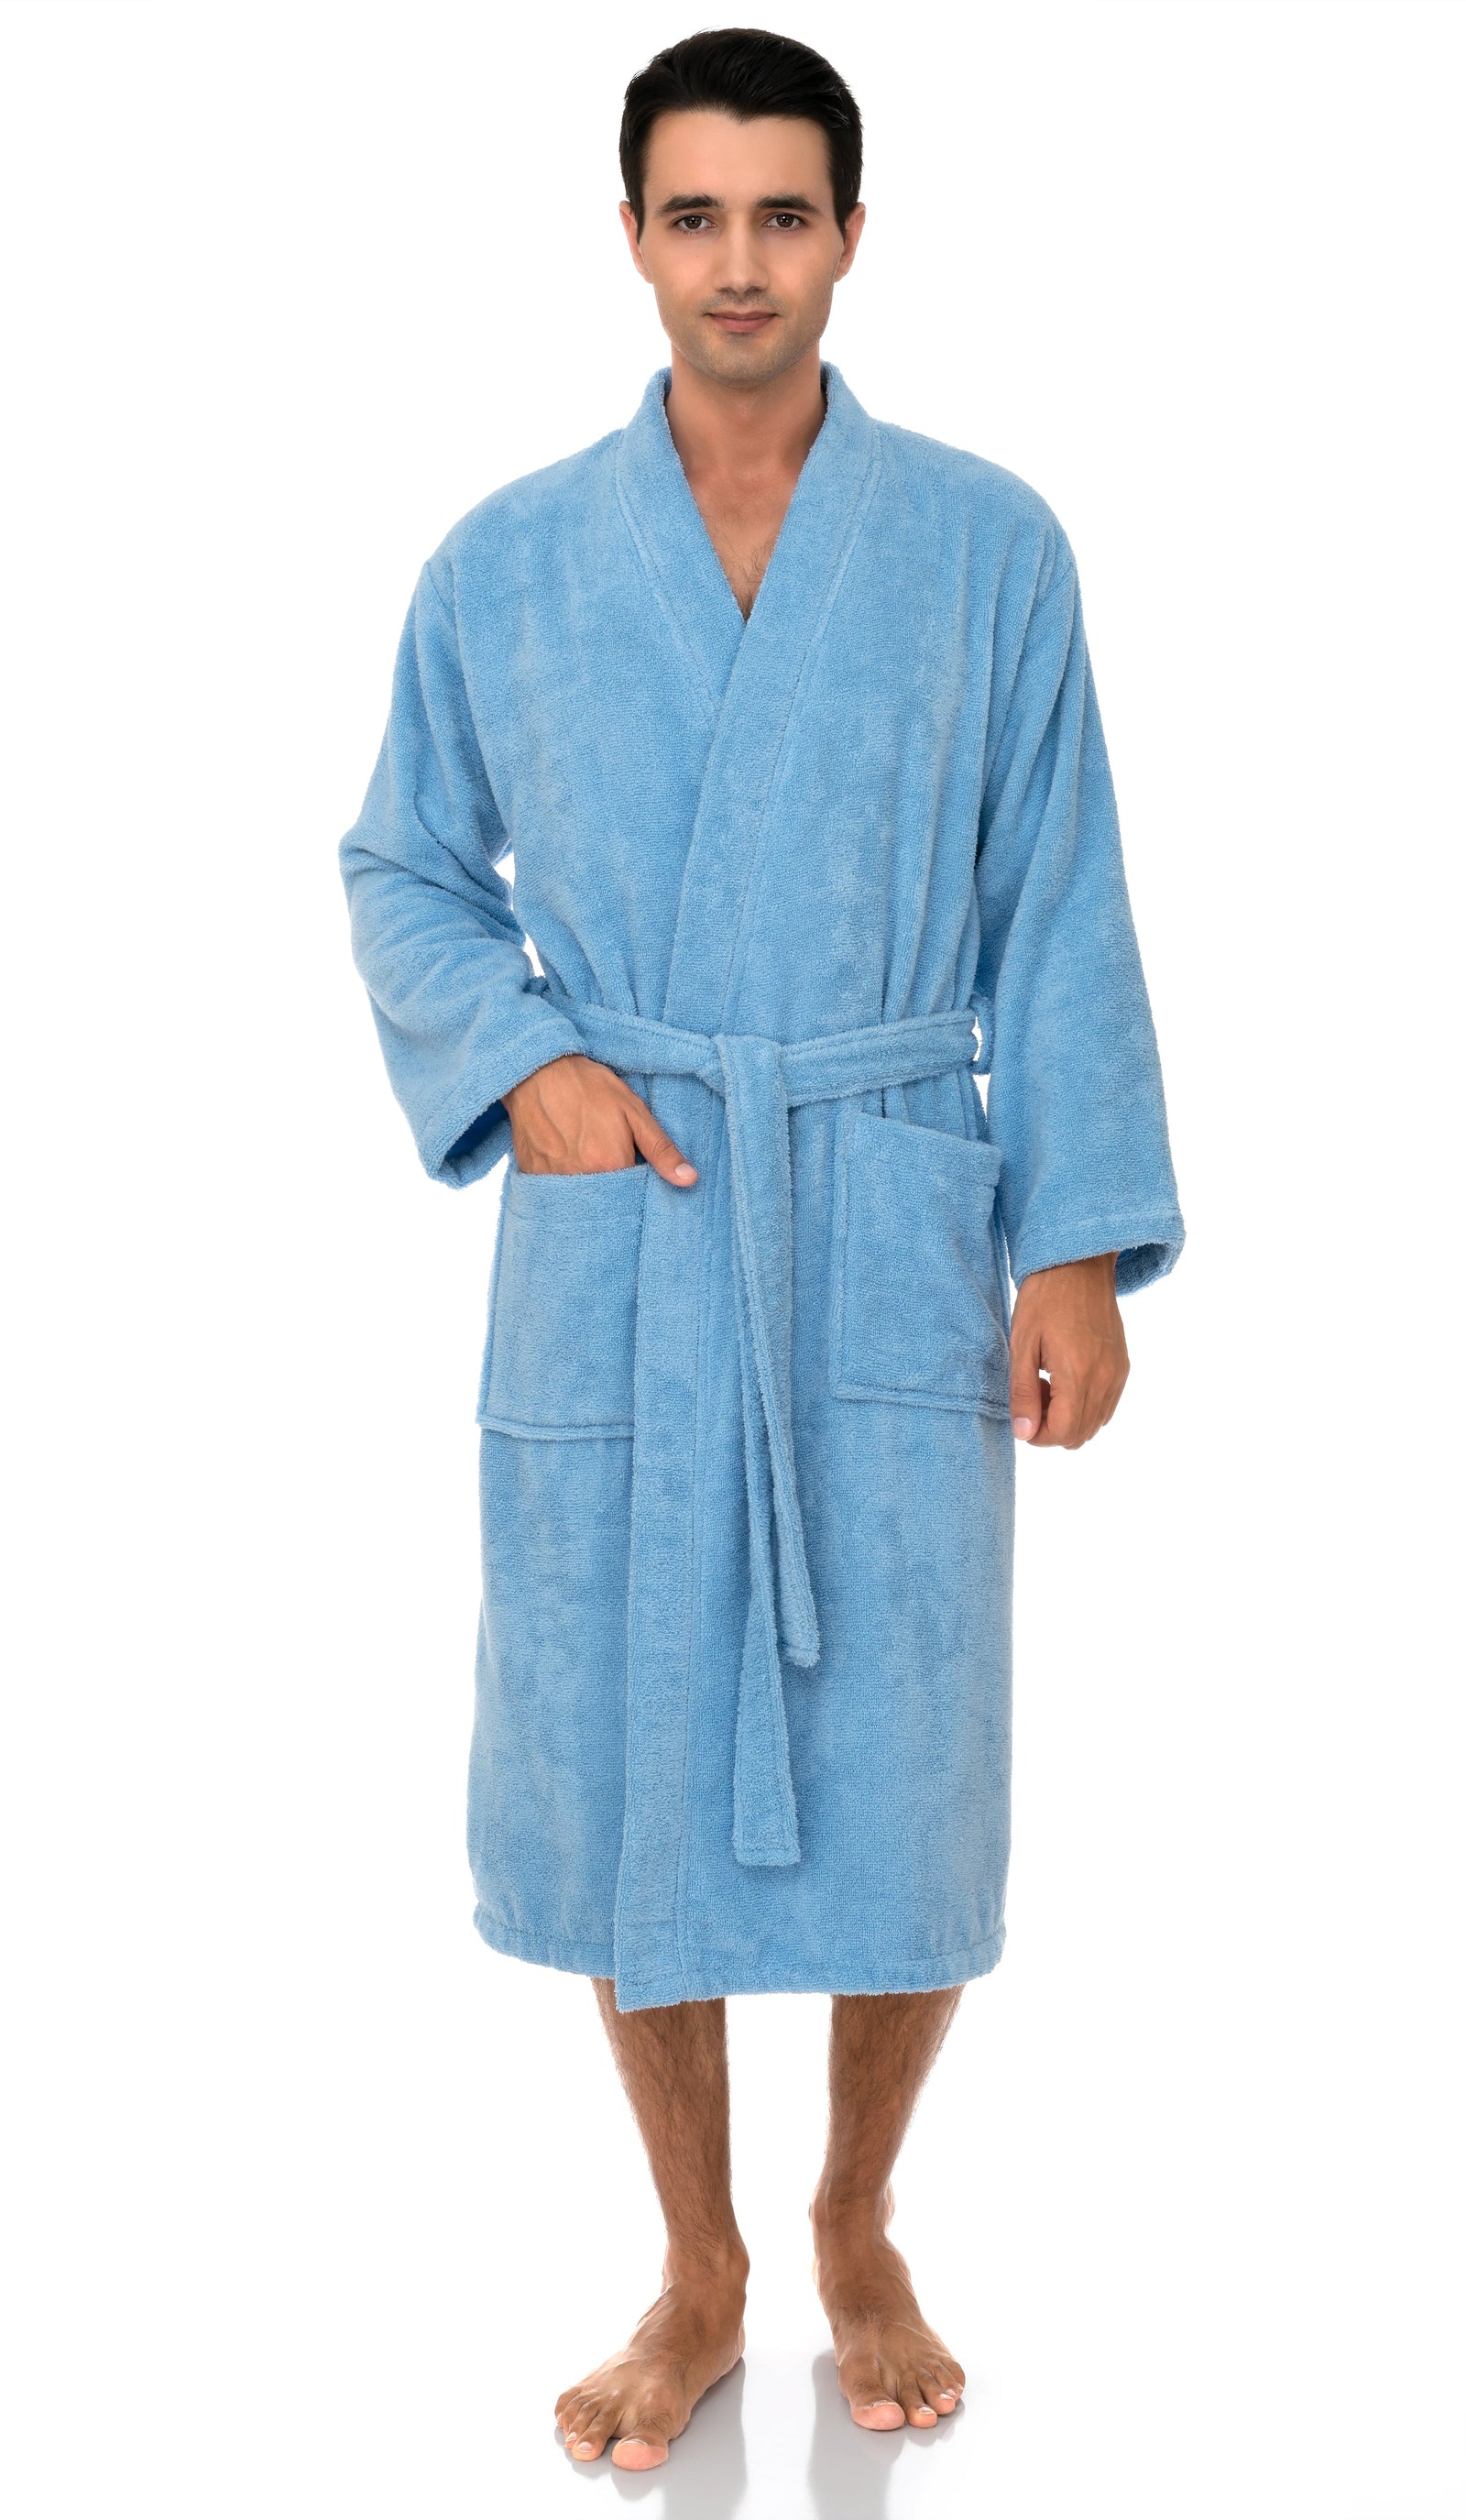 TowelSelections Mens Robe with Hood, Premium Cotton Terry Cloth Bathrobe,  Soft Bath Robes for Men Medium Frost Gray